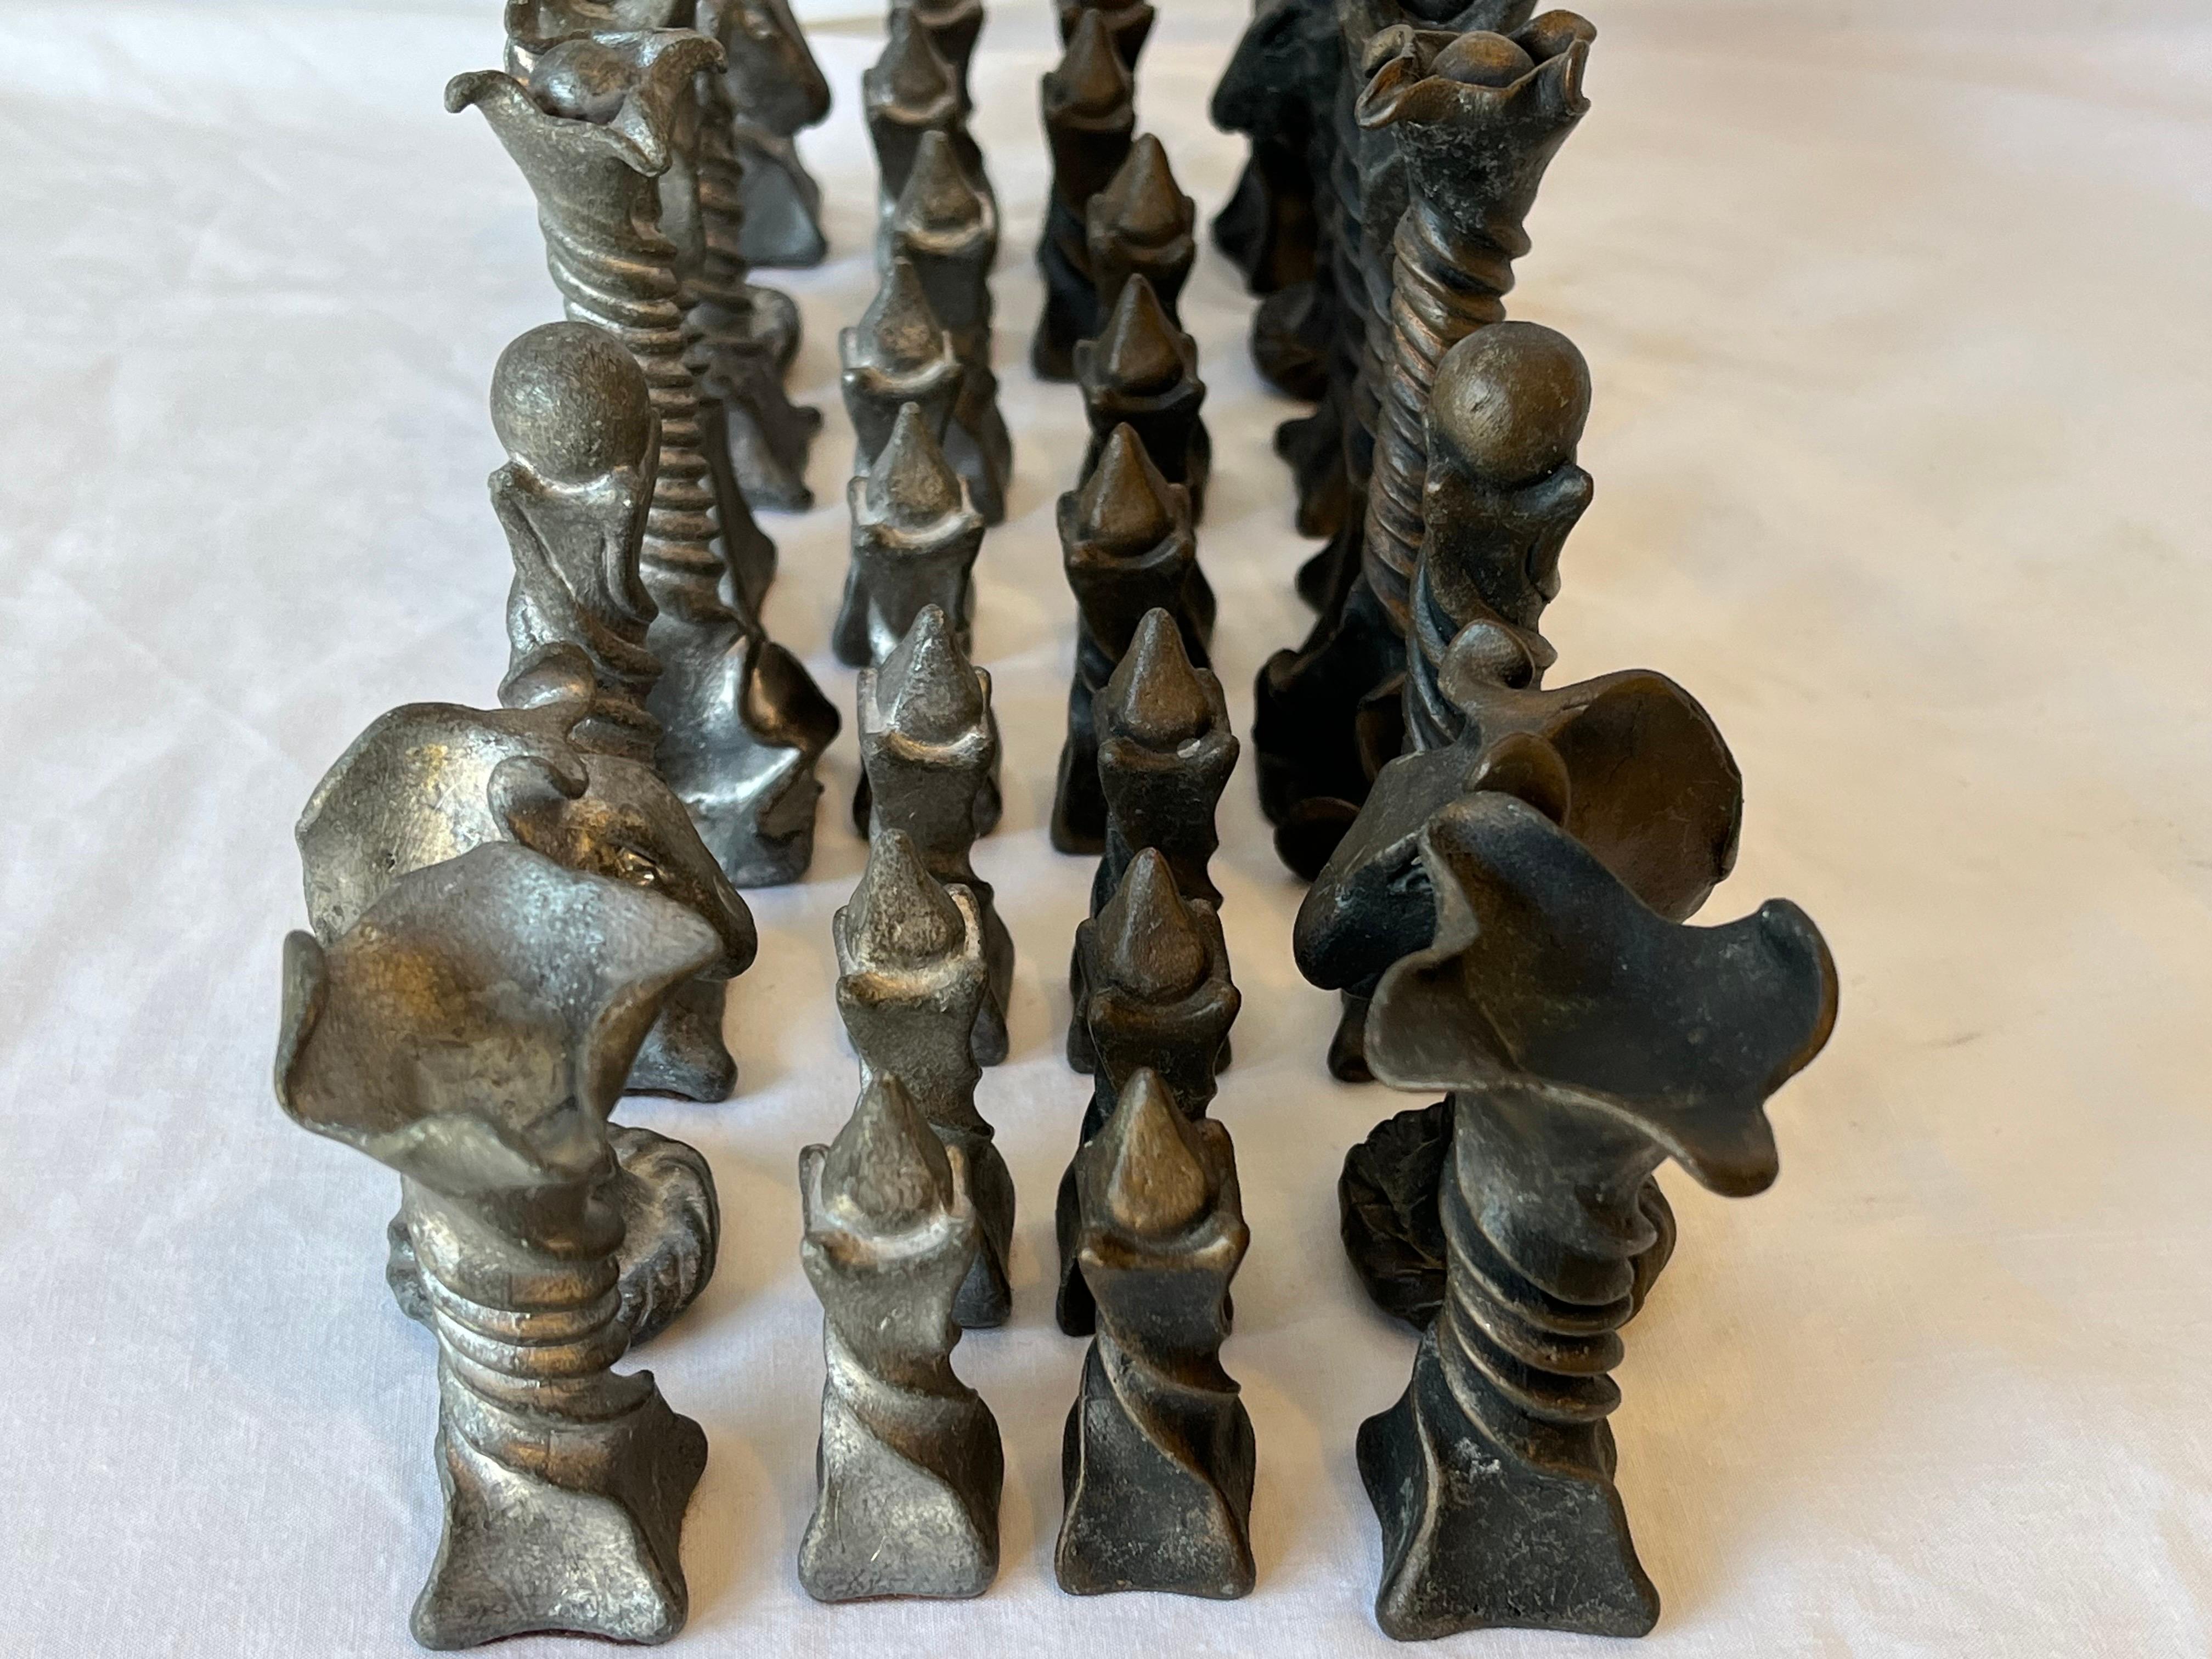 20th Century Vintage Brutalist Style Cast Metal Chess Set with Twisted and Flanged Design